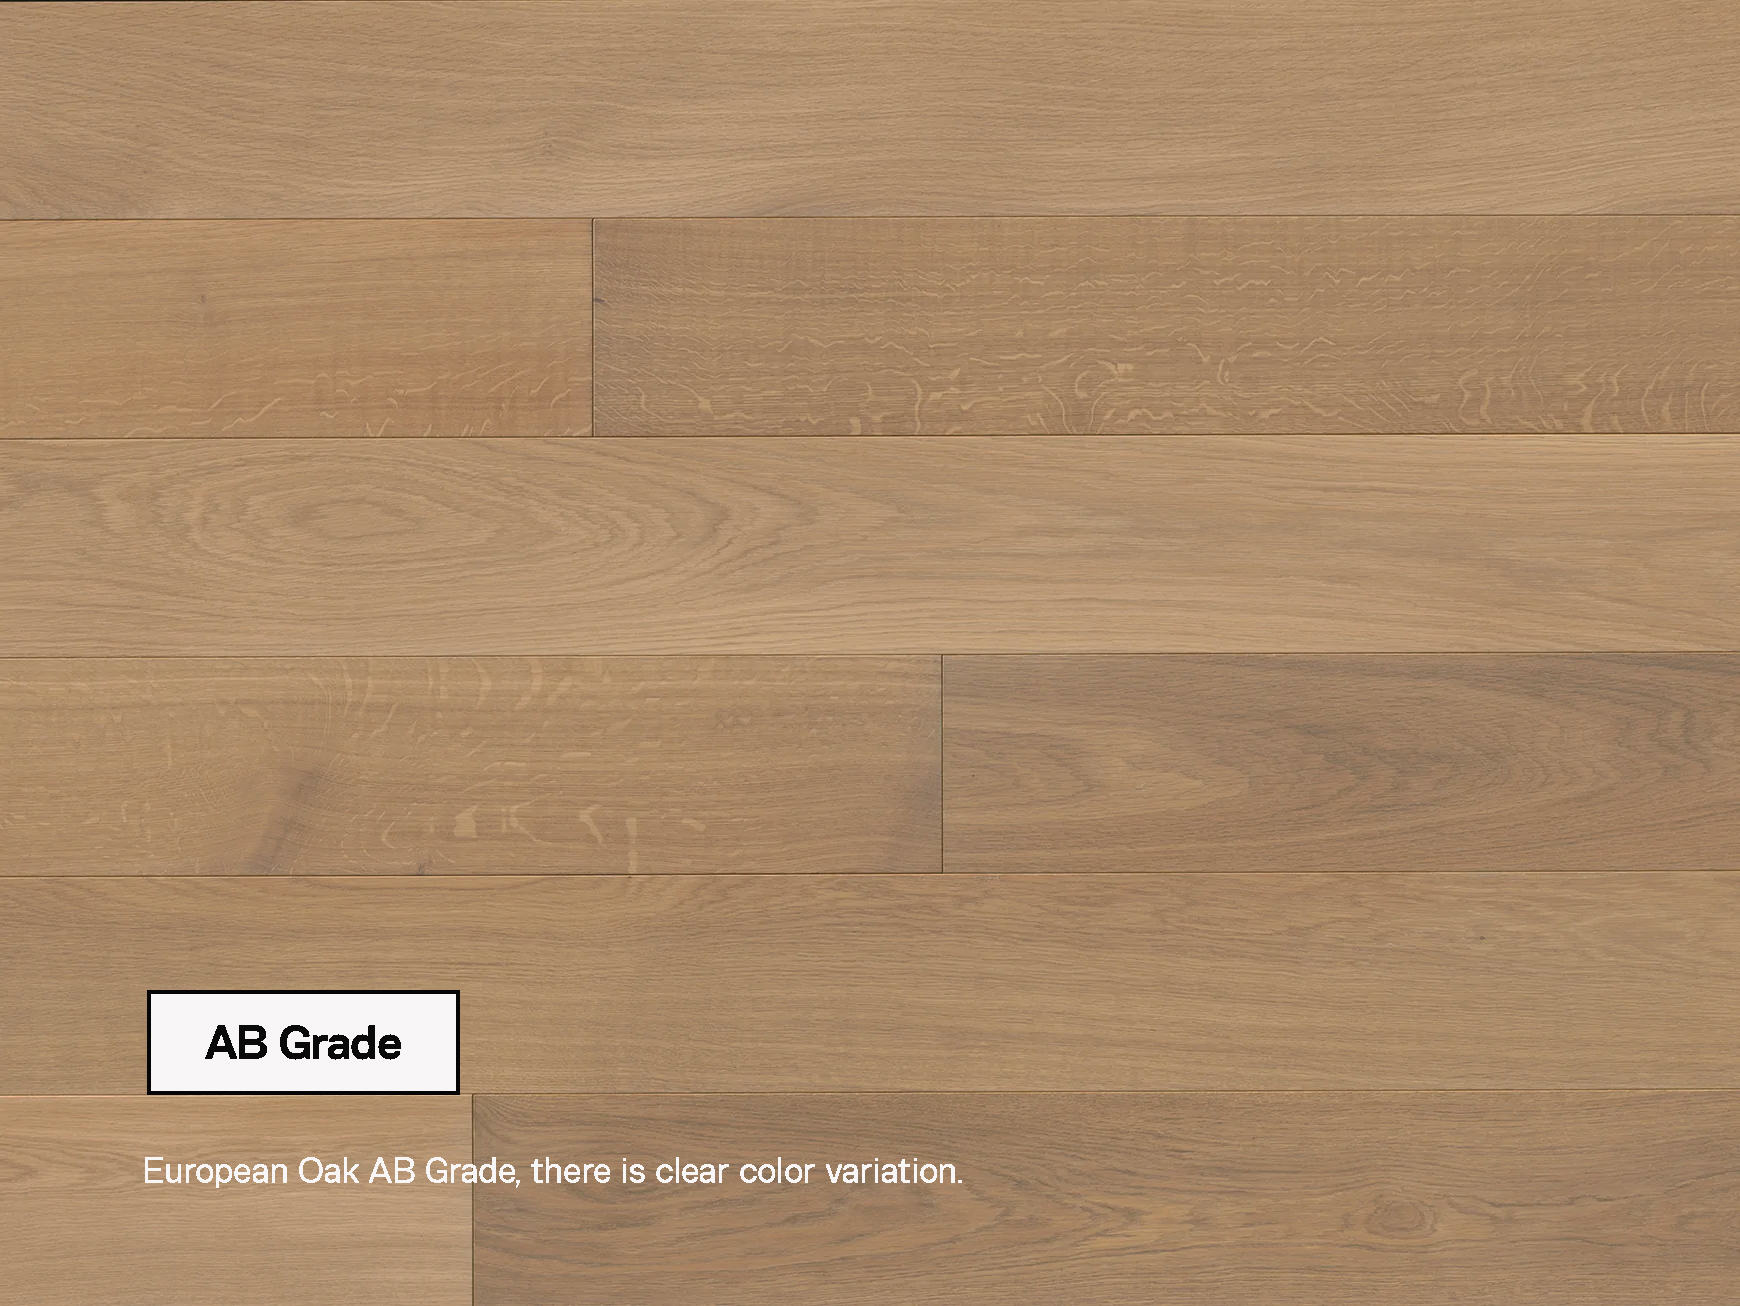 European Oak ABCD Grade, there is clear color variation